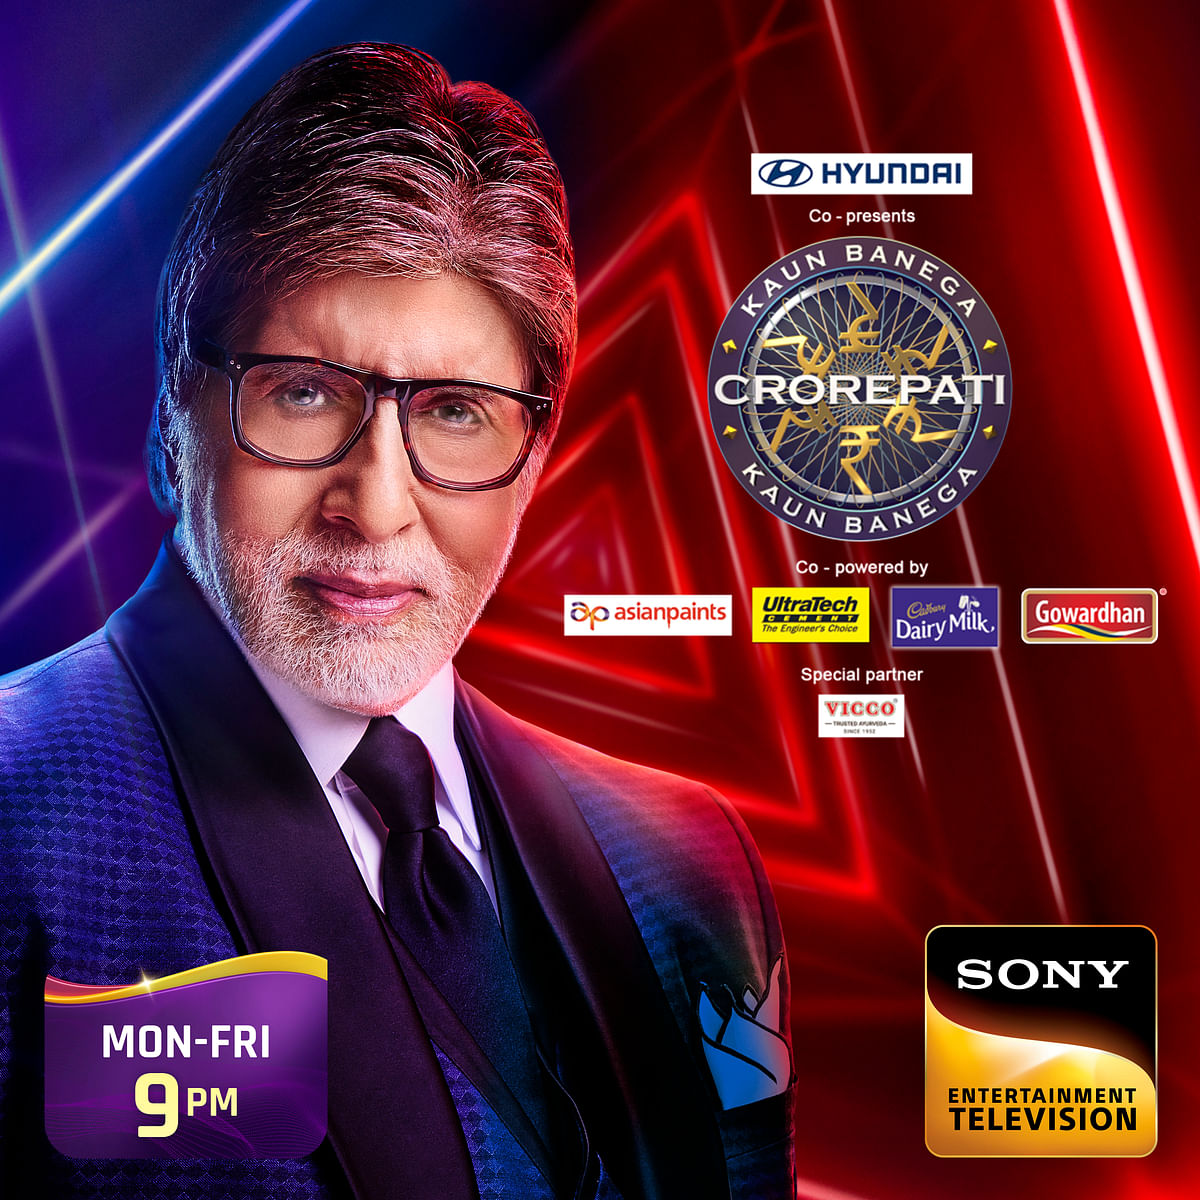 KBC's sponsors for Sony Entertainment Television